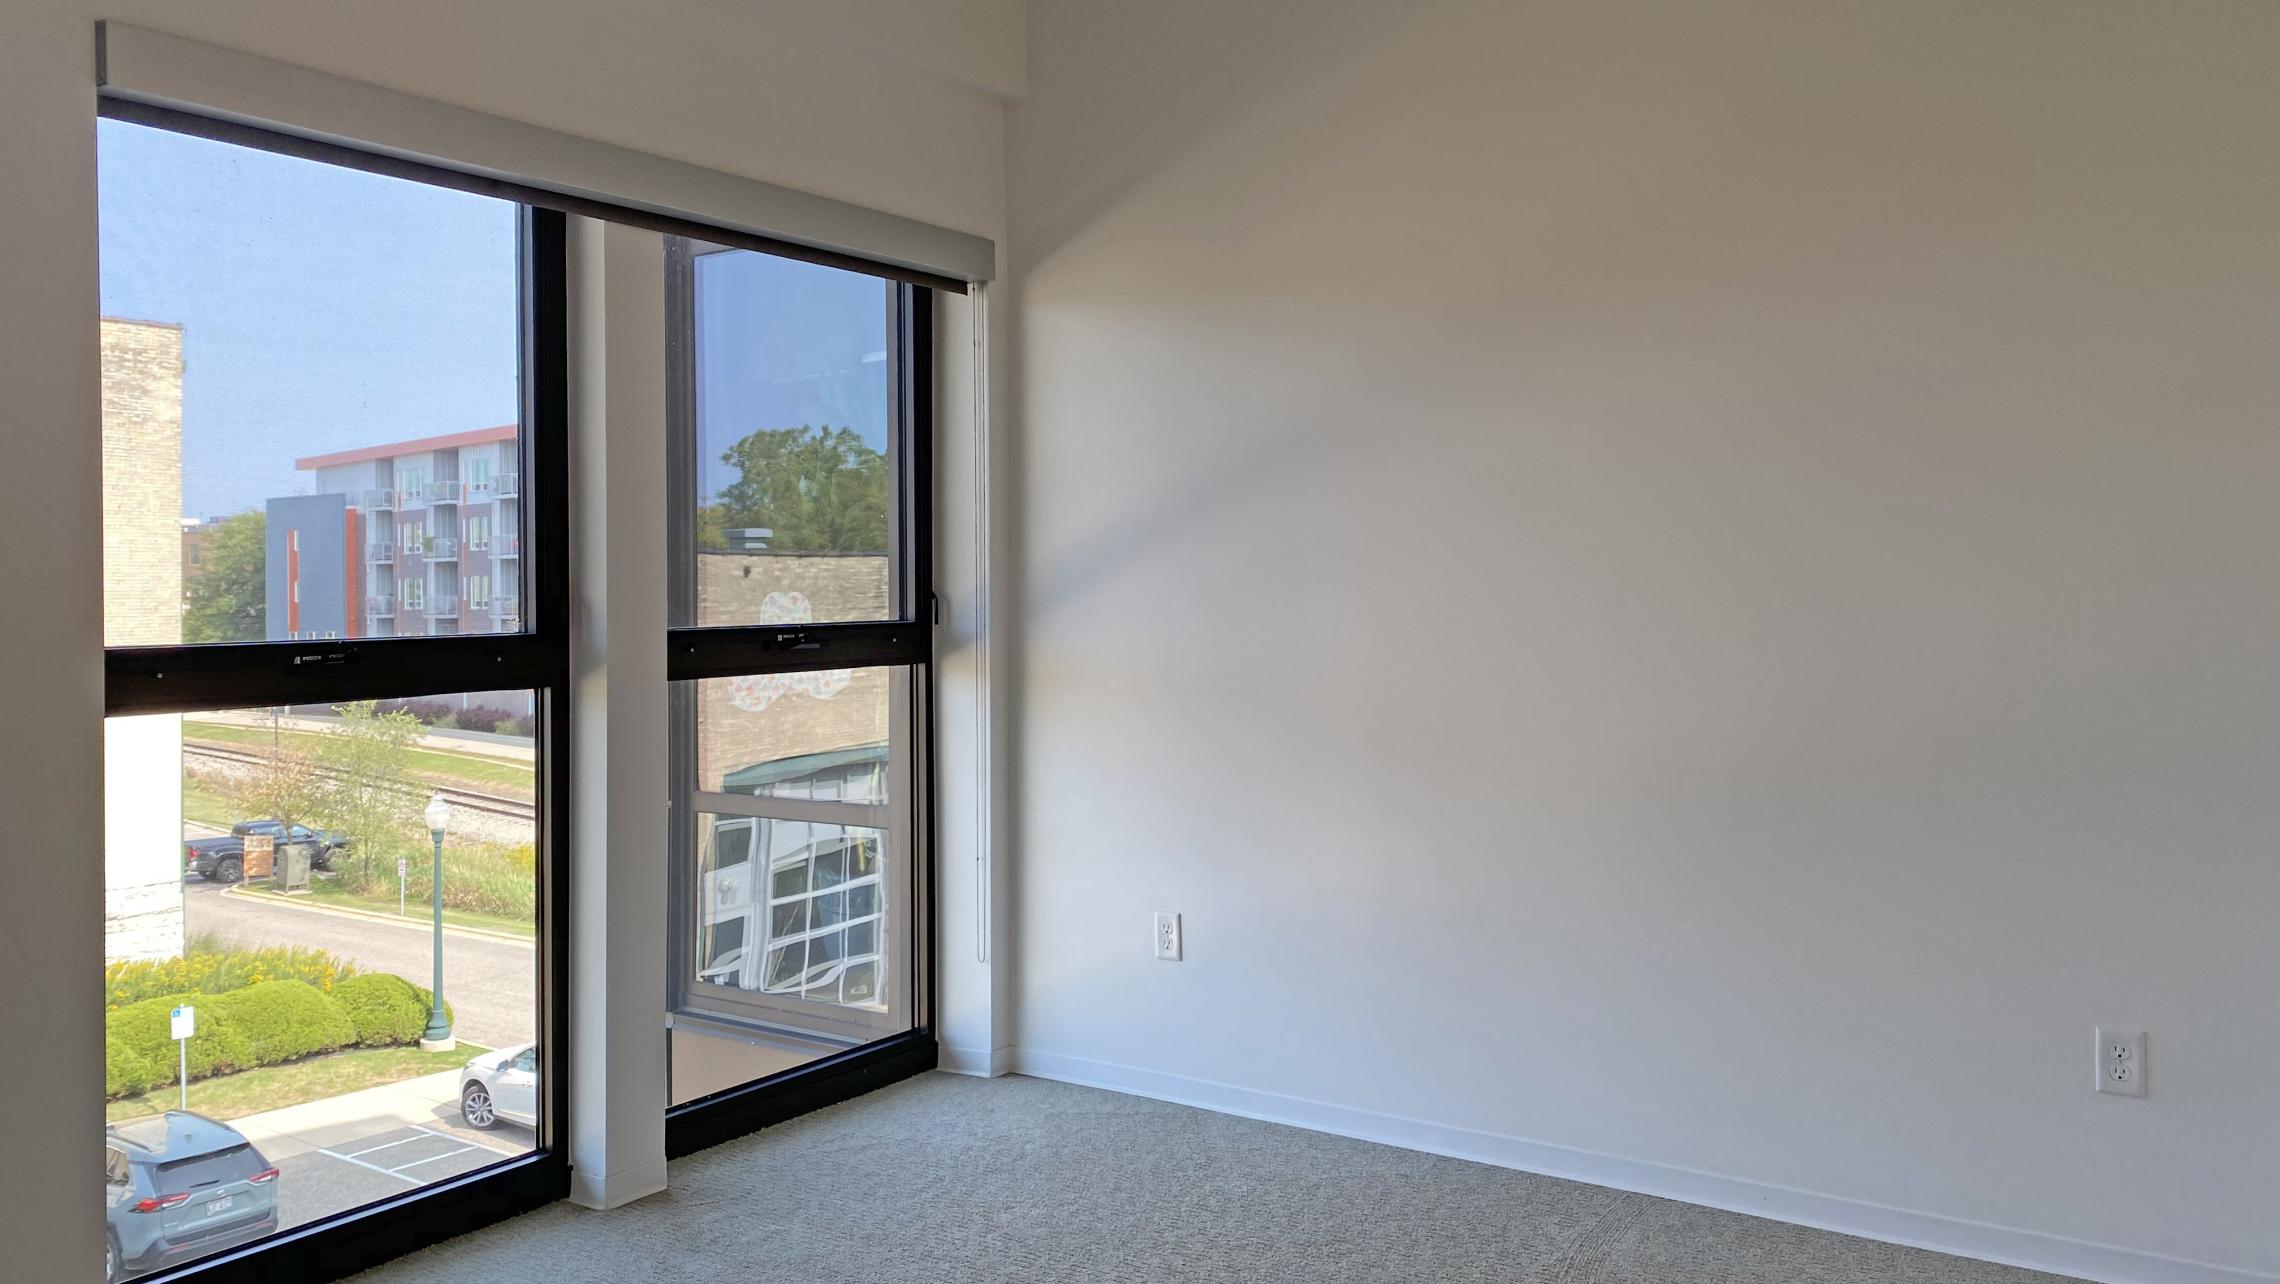 SEVEN27-The-Yards-Apartment-322-Two-Bedroom-Modern-Upscale-Luxury-Living-Kitchen-Bathroom-Design-Lounge-Fitness-Gym-Courtyard-Lake-View-Downtown-Madison